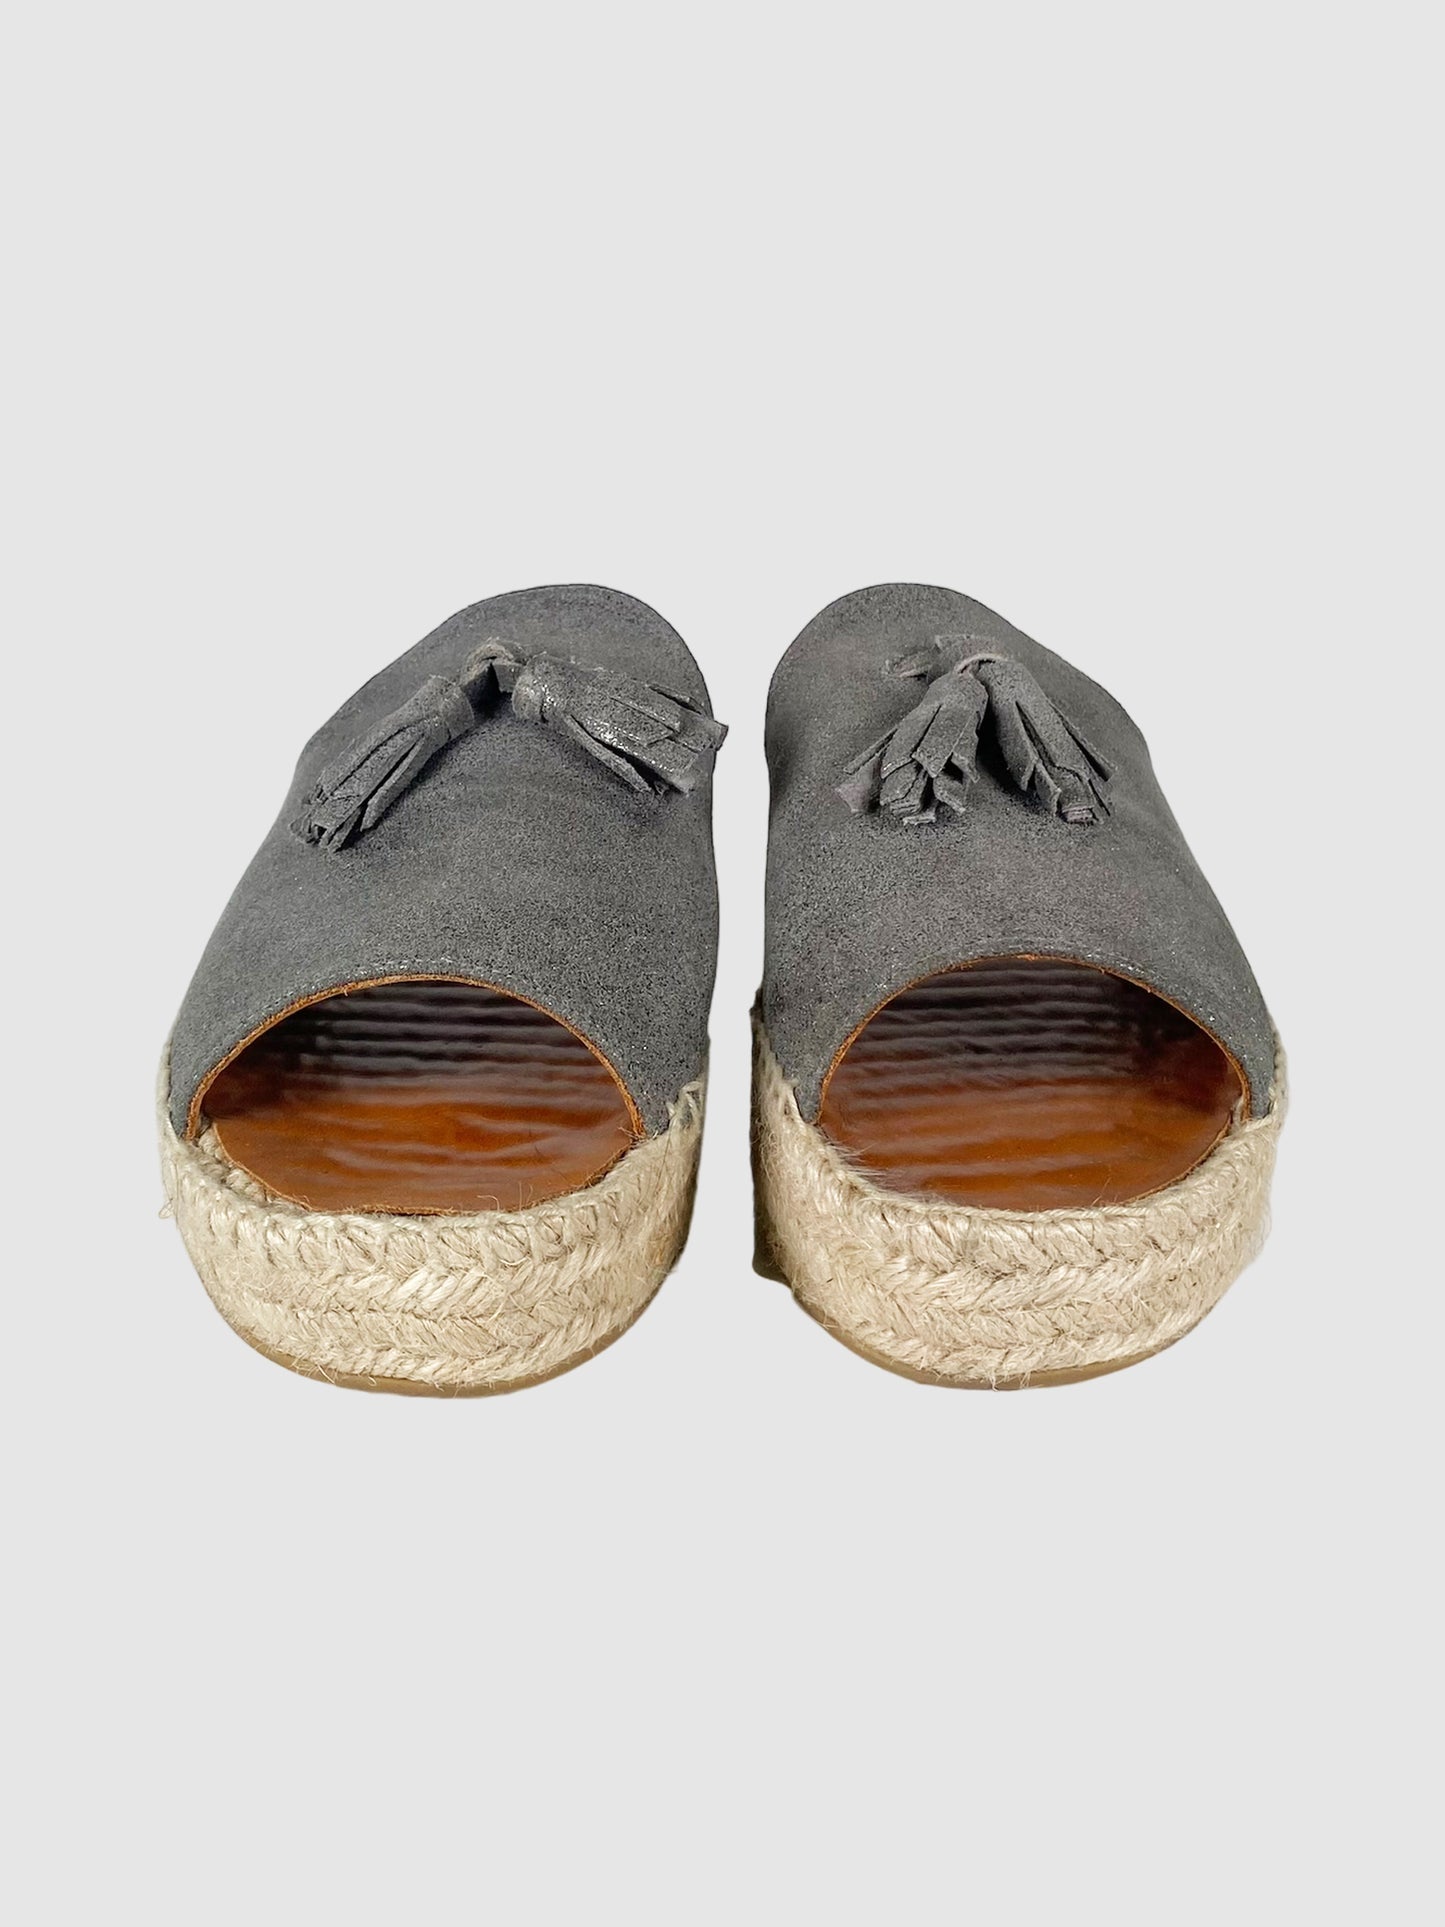 Leather Espadrilles with Tassels - Size 38